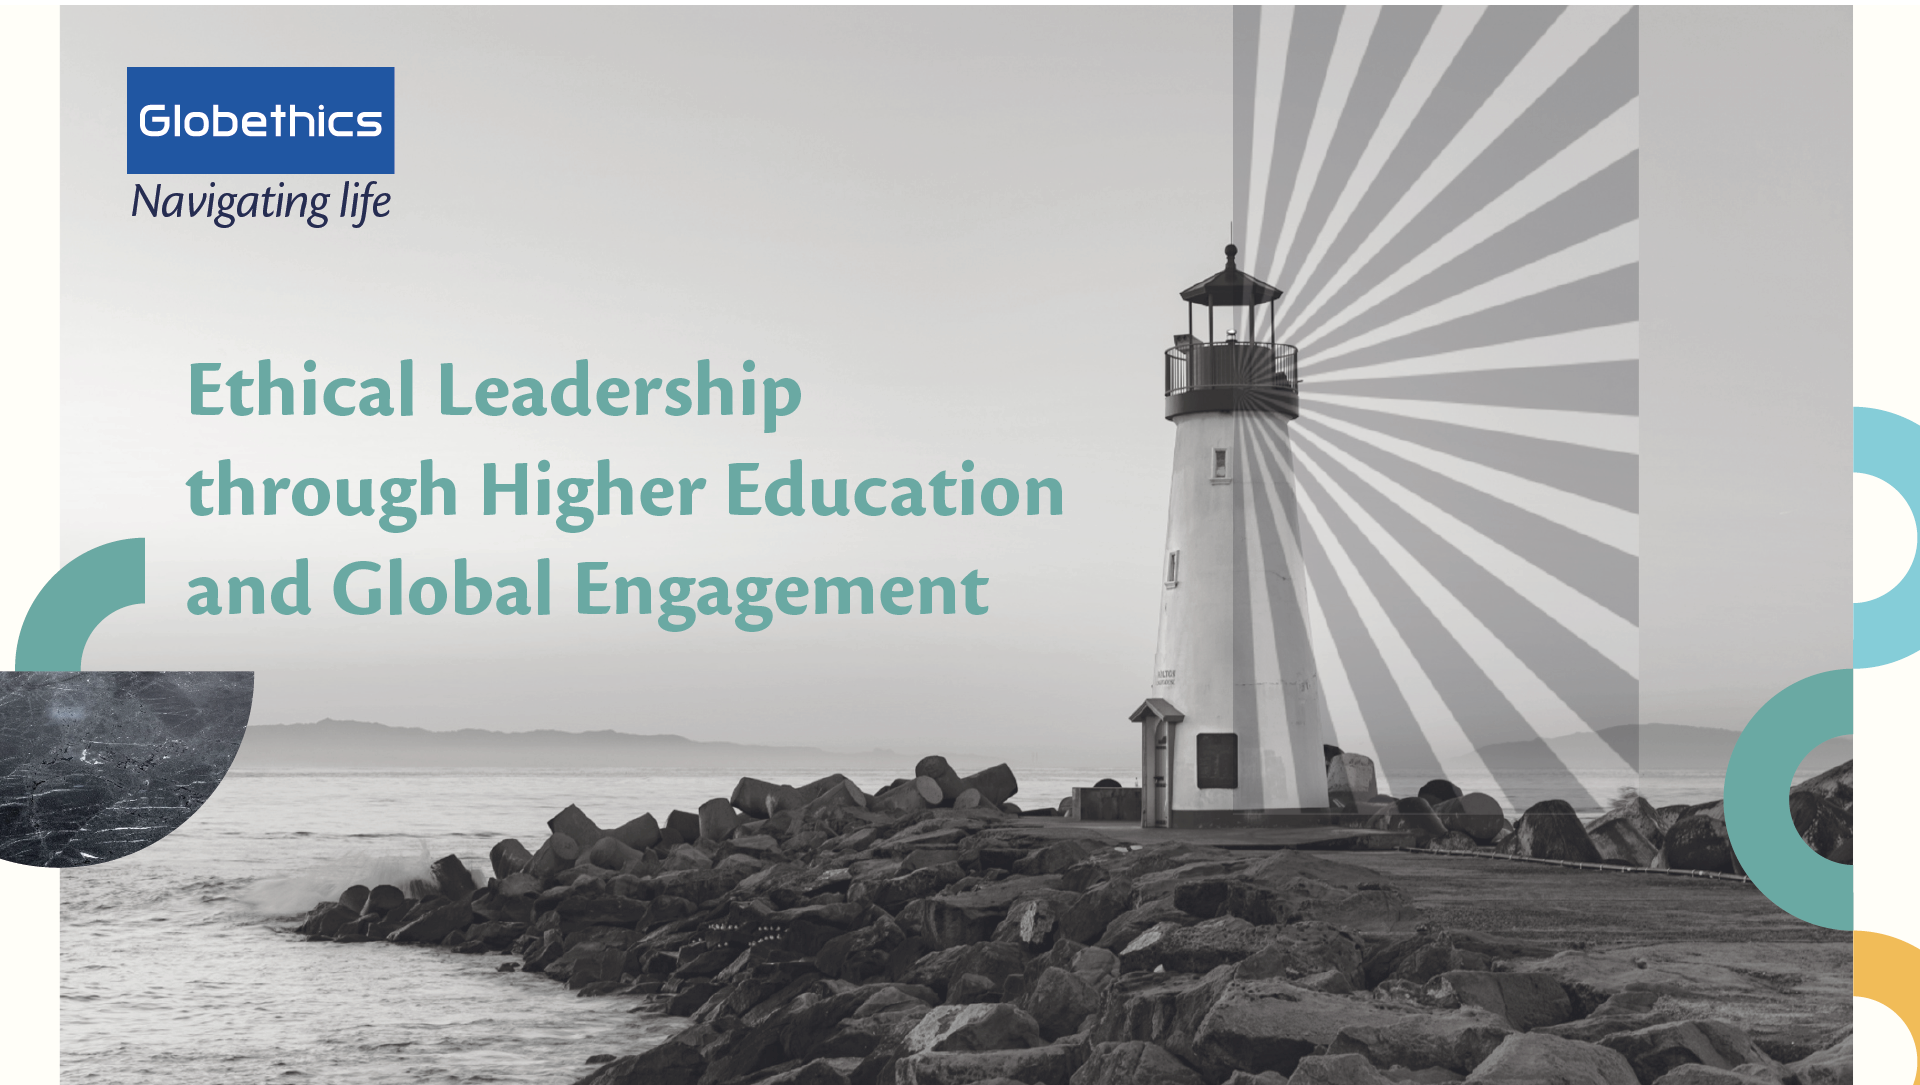 Ethical Leadership through Higher Education and Global Engagement